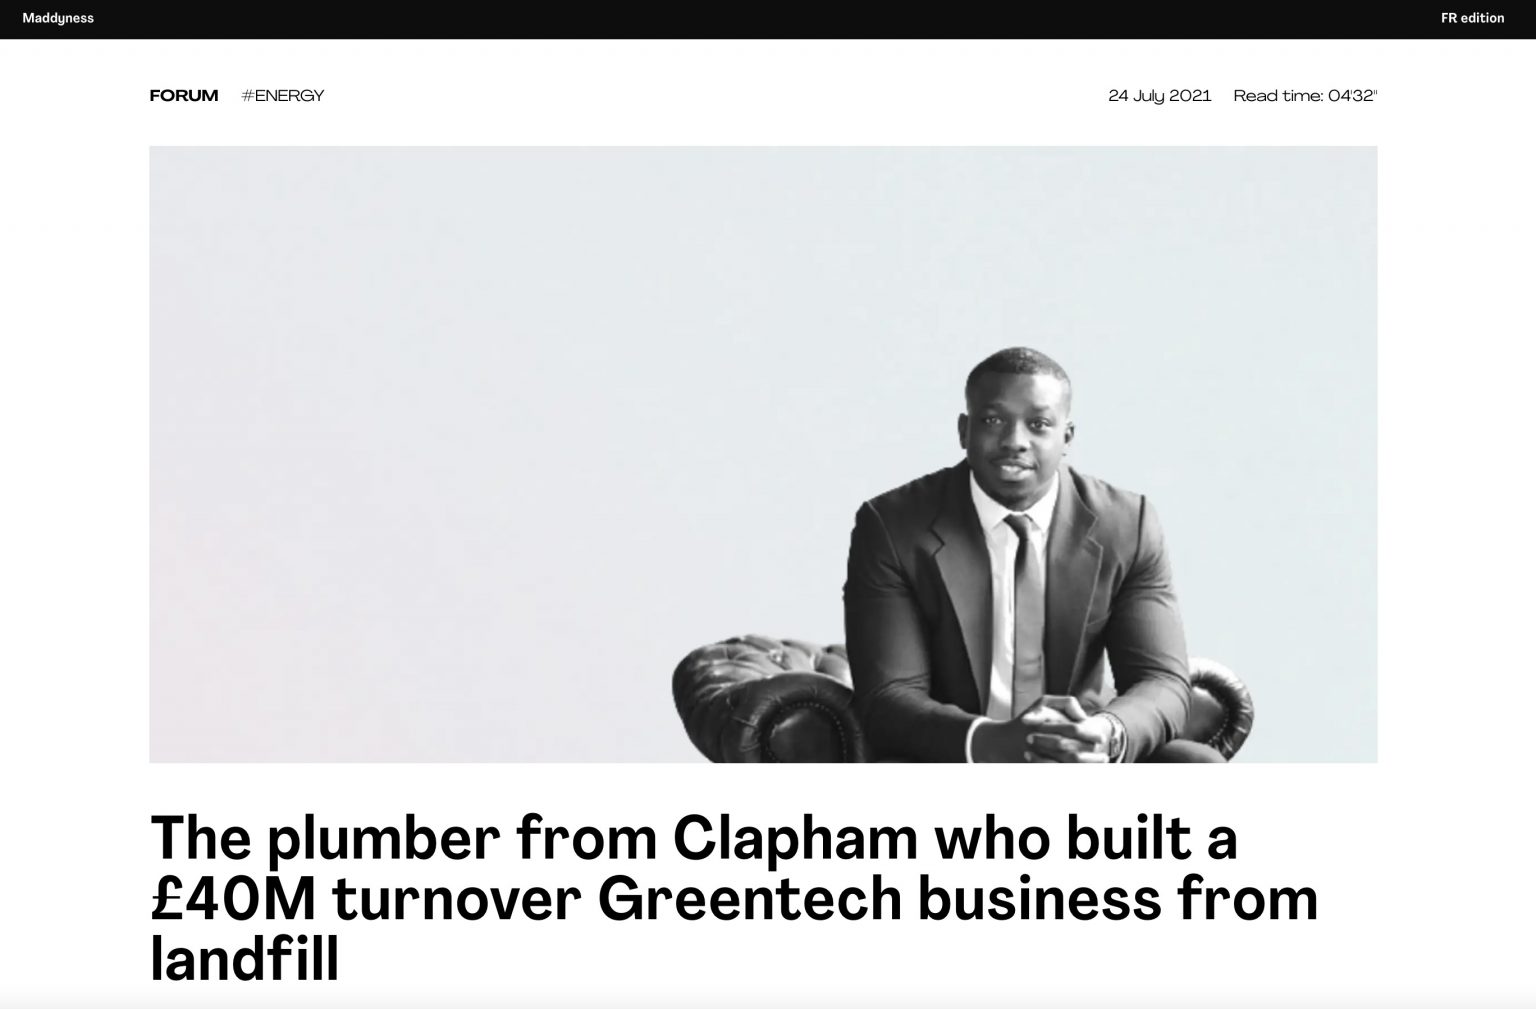 Maddyness — The plumber from Clapham who built a £40M turnover Greentech business from landfill